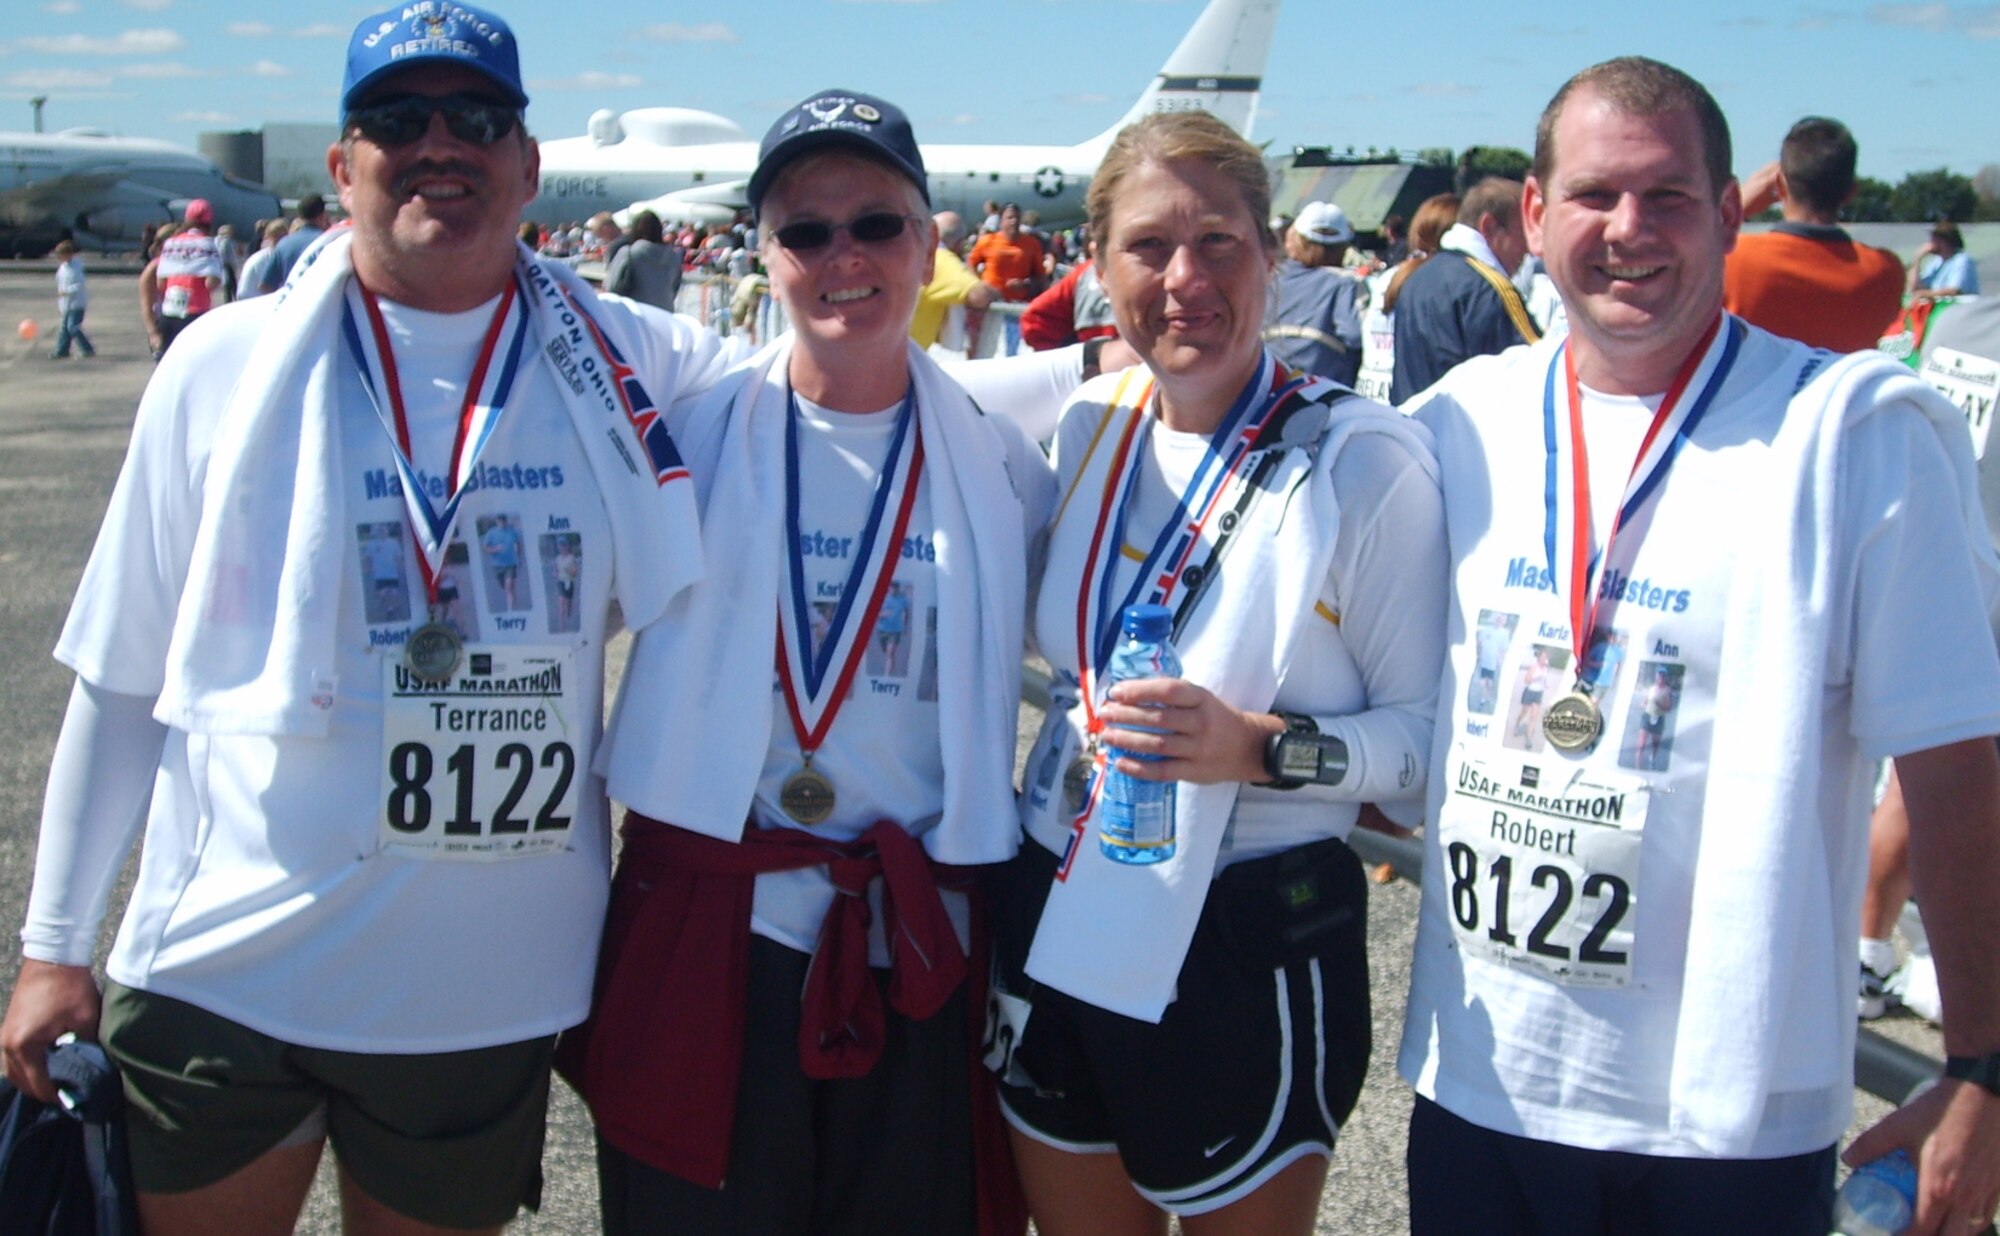 From left, Terry Owens, 81st Training Support Squadron, and Annette Owens, Karla Propper and Robert Randall, 336th Training Squadron, the Master Blasters, finished fifth out of 17 teams in the masters category at the 11th annual Air Force Marathon, Sept. 15 at Wright-Patterson Air Force Base, Ohio.  The event showcased 60 years of Air Force heritage.  Several Keesler teams and individuals participated.  (Photo by Larry Bright)

